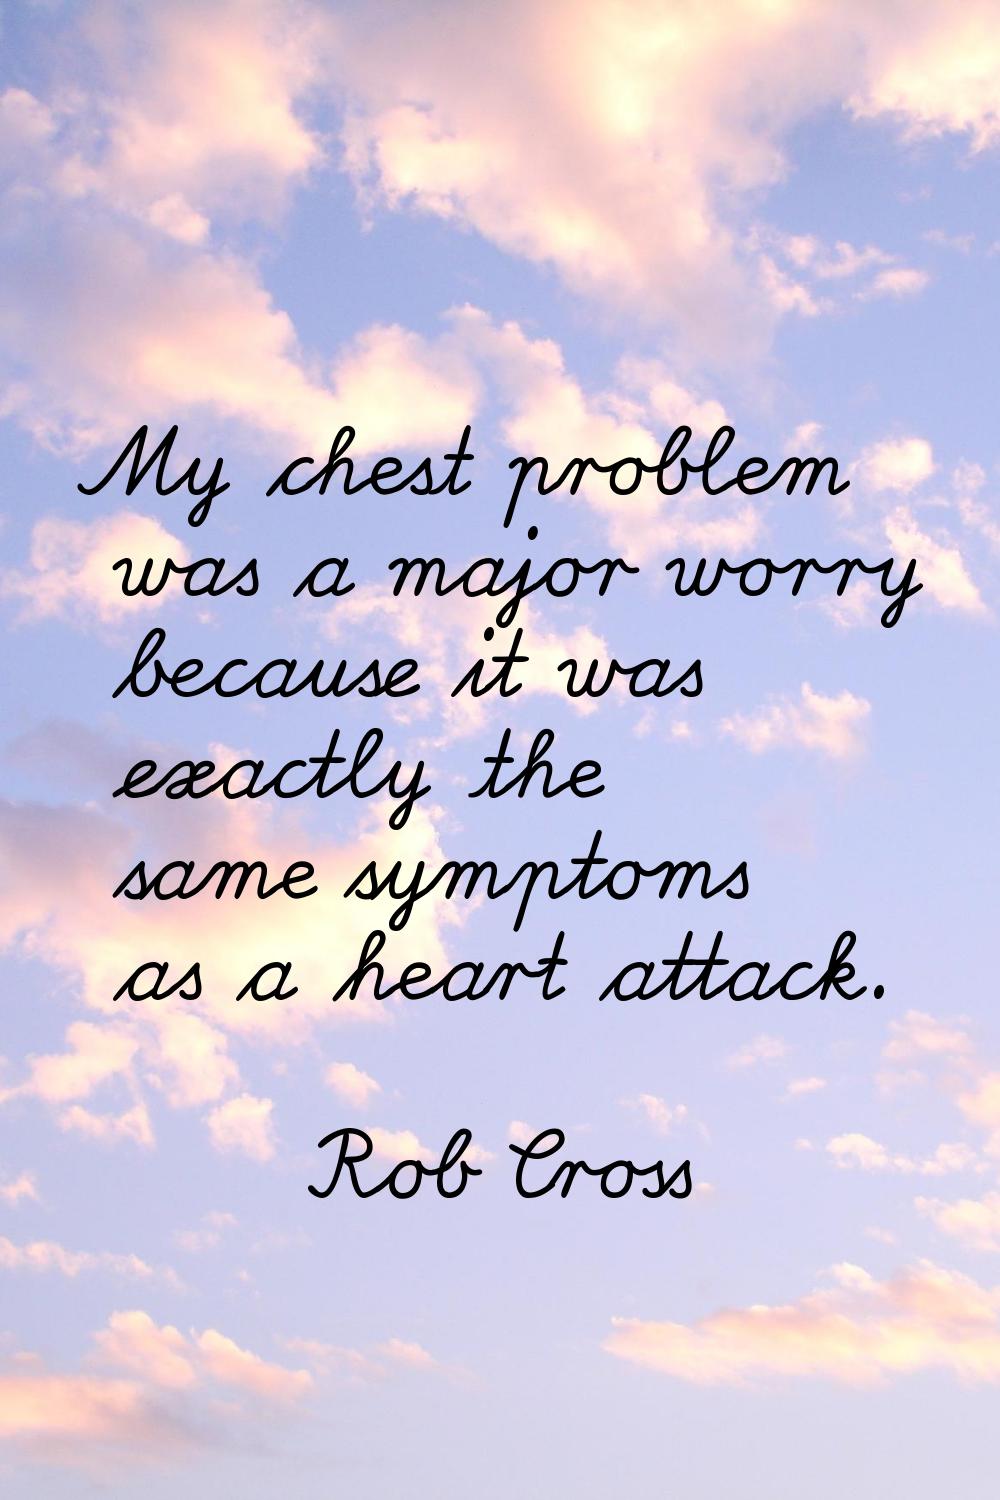 My chest problem was a major worry because it was exactly the same symptoms as a heart attack.